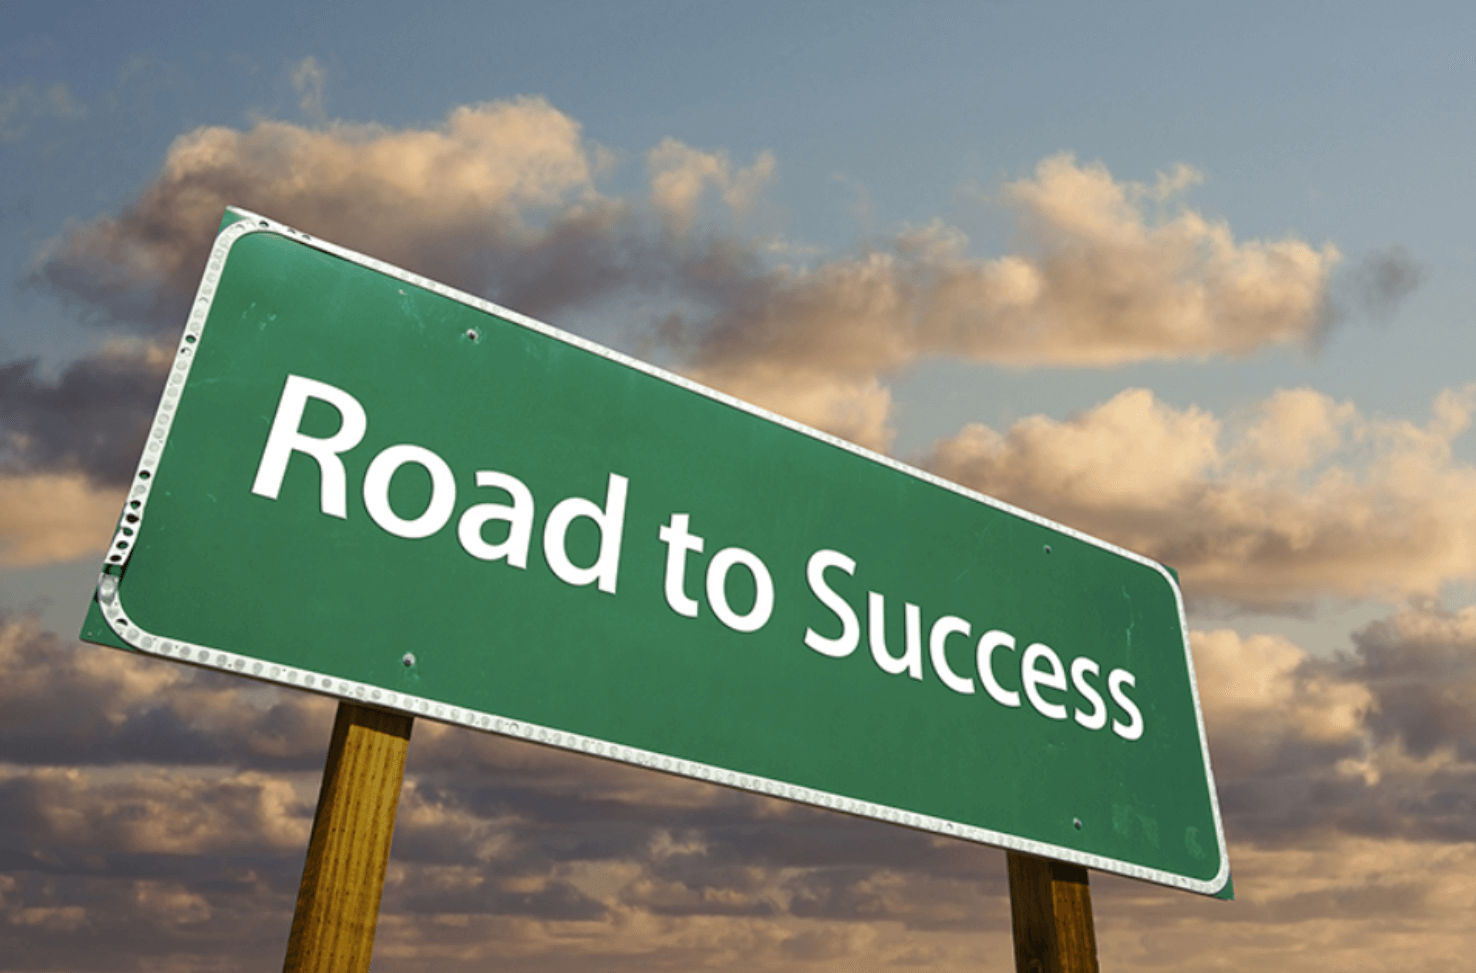 the road to success